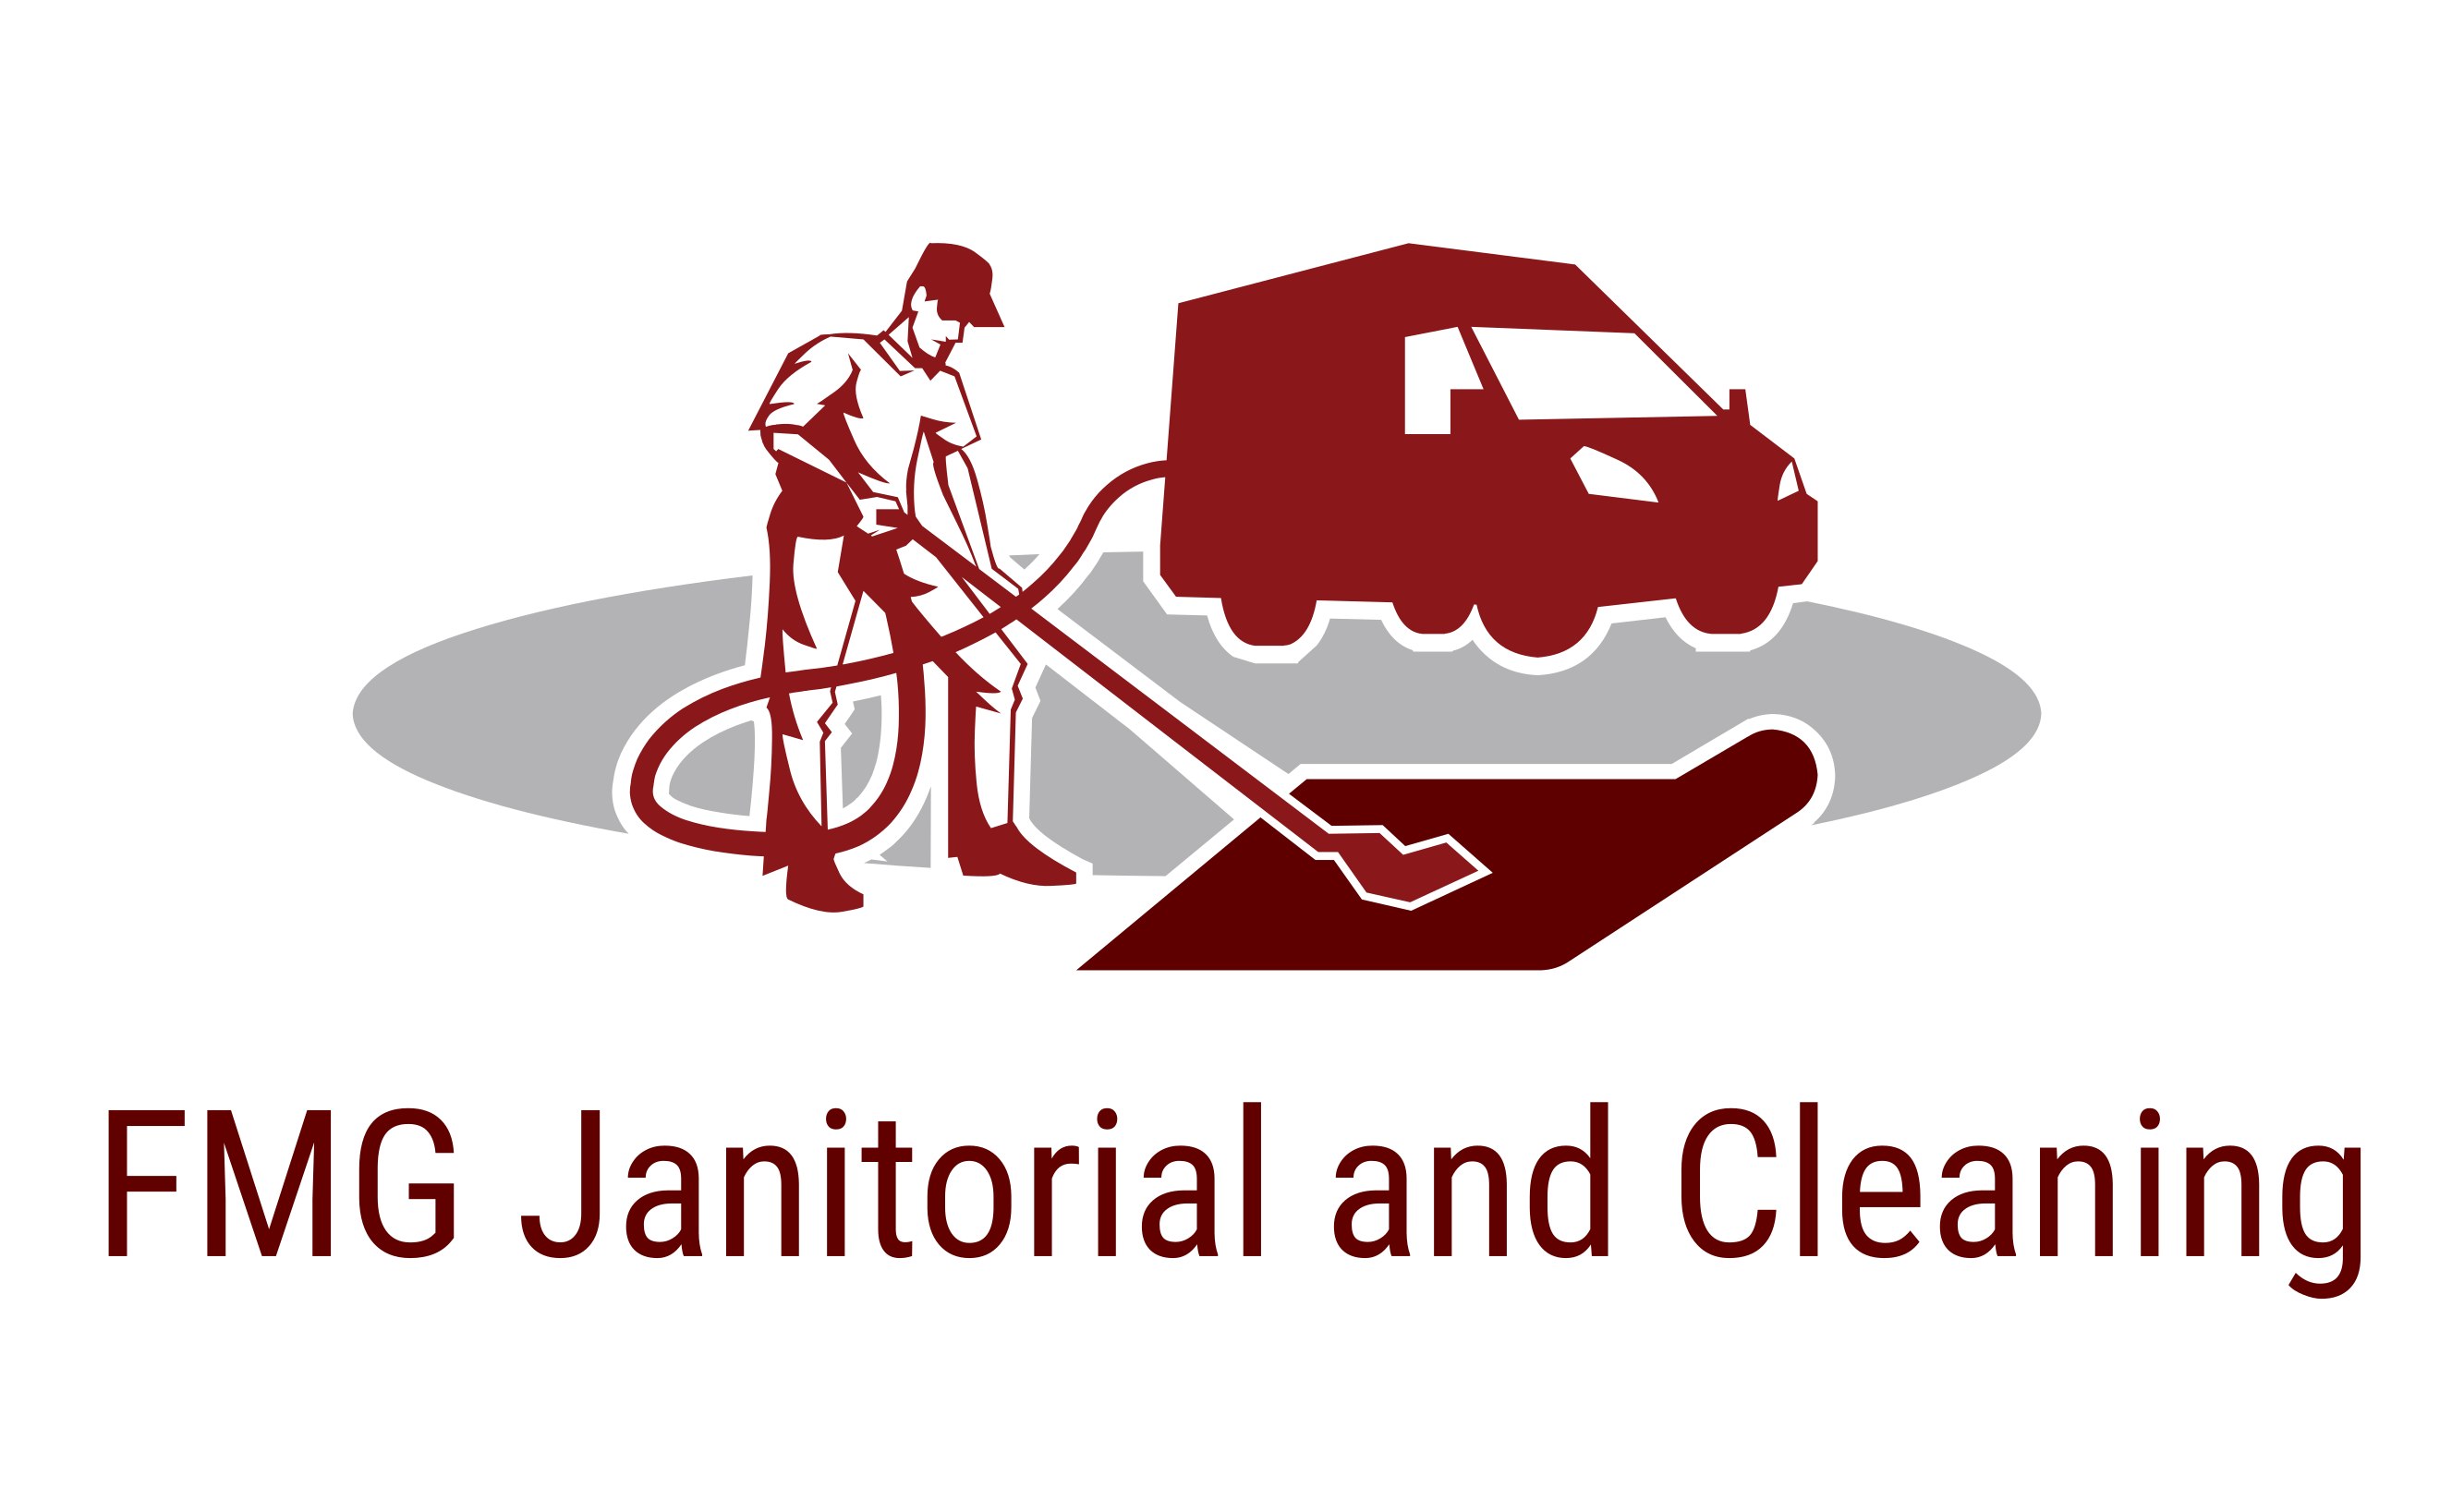 FMG Janitorial And Cleaning Logo